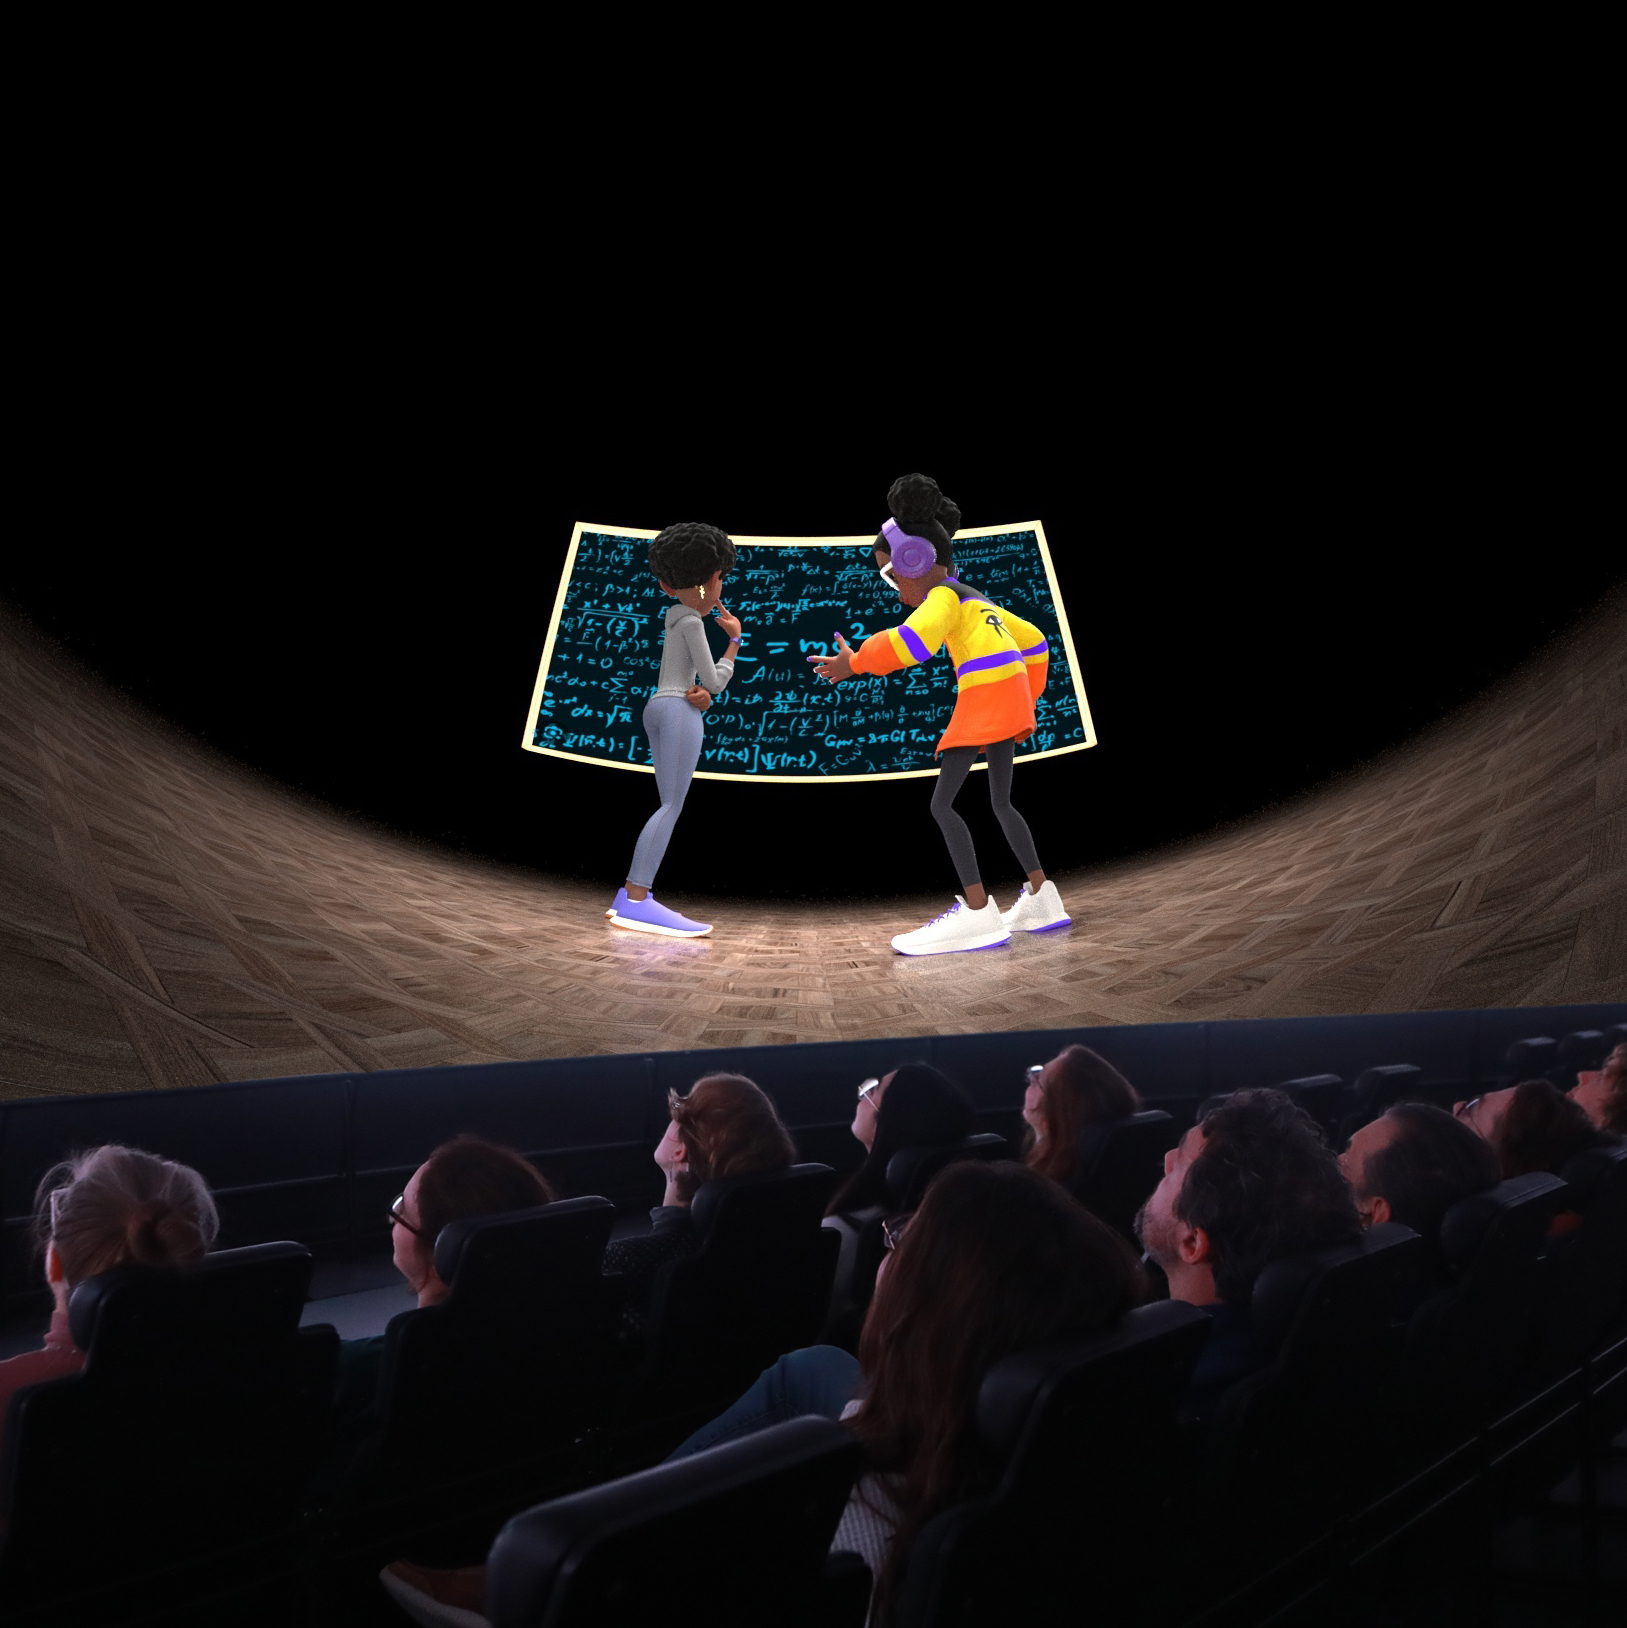 Audience sits in the Adler Planetarium’s Grainger Sky Theater watching Niyah and the Multiverse. Screen shows young Niyah meeting grown-up astrophysicist Niyah in the multiverse where they discuss multiverse theory in front of a blackboard with equations written on them.